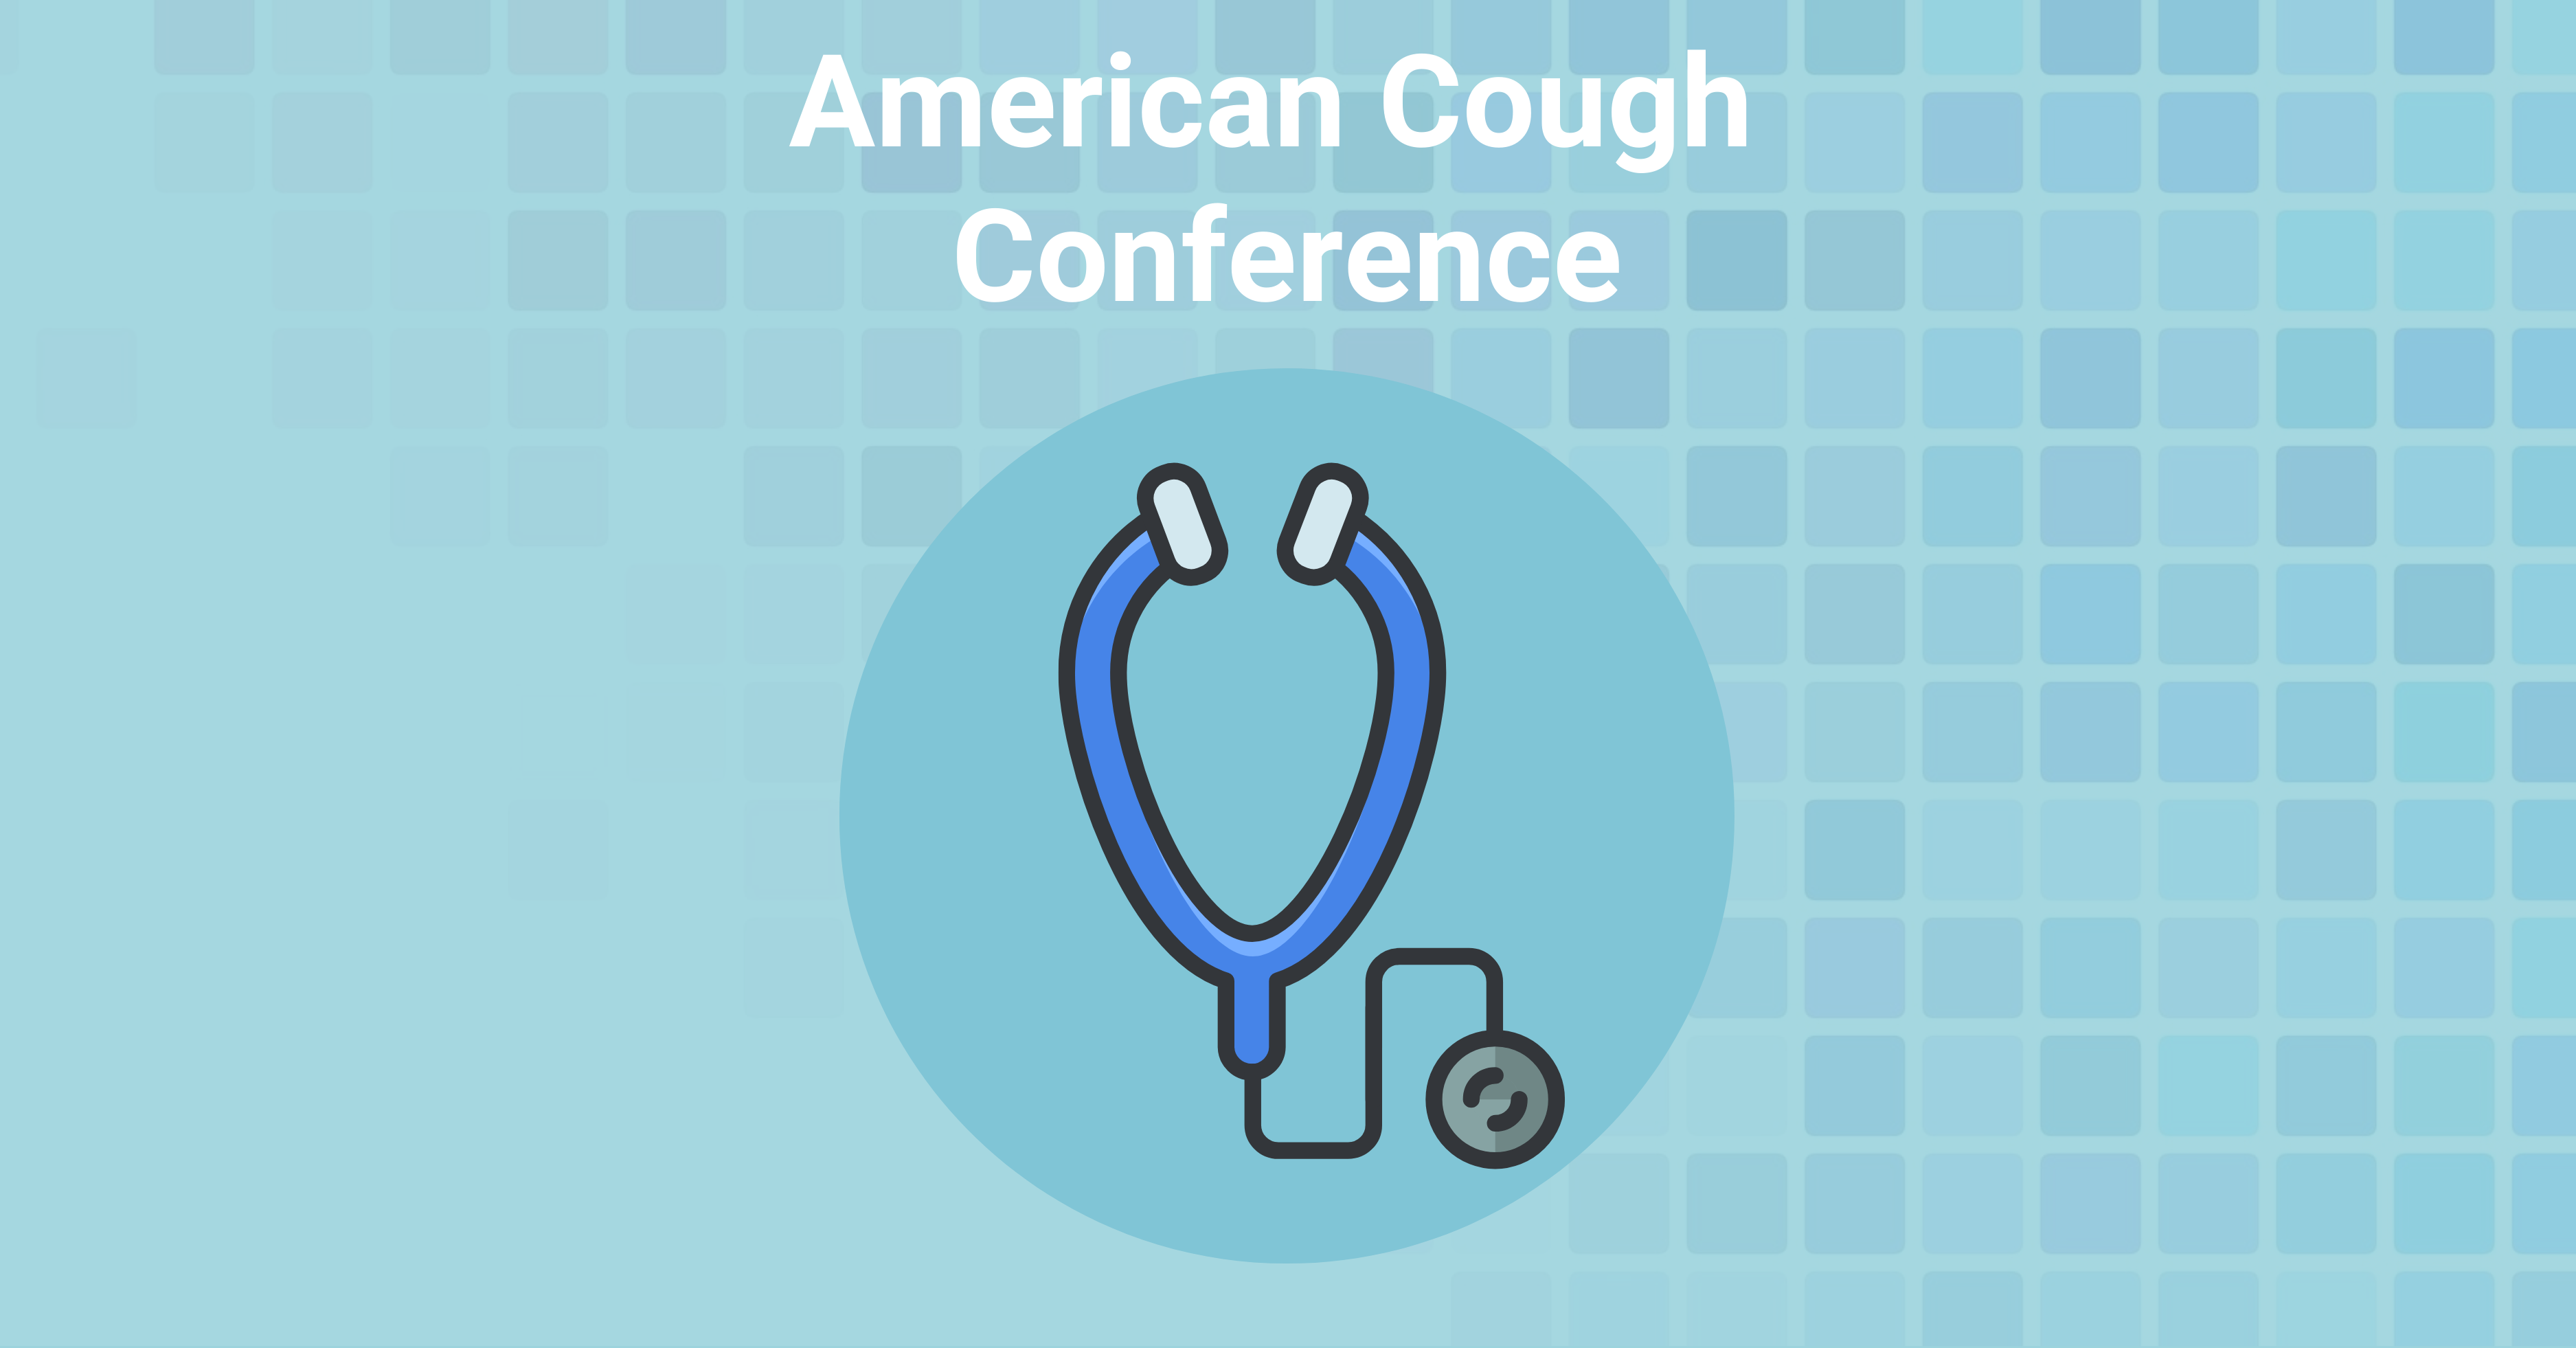 The Large Placebo Effect in Cough Presents Major Challenges for Antitussive Trials